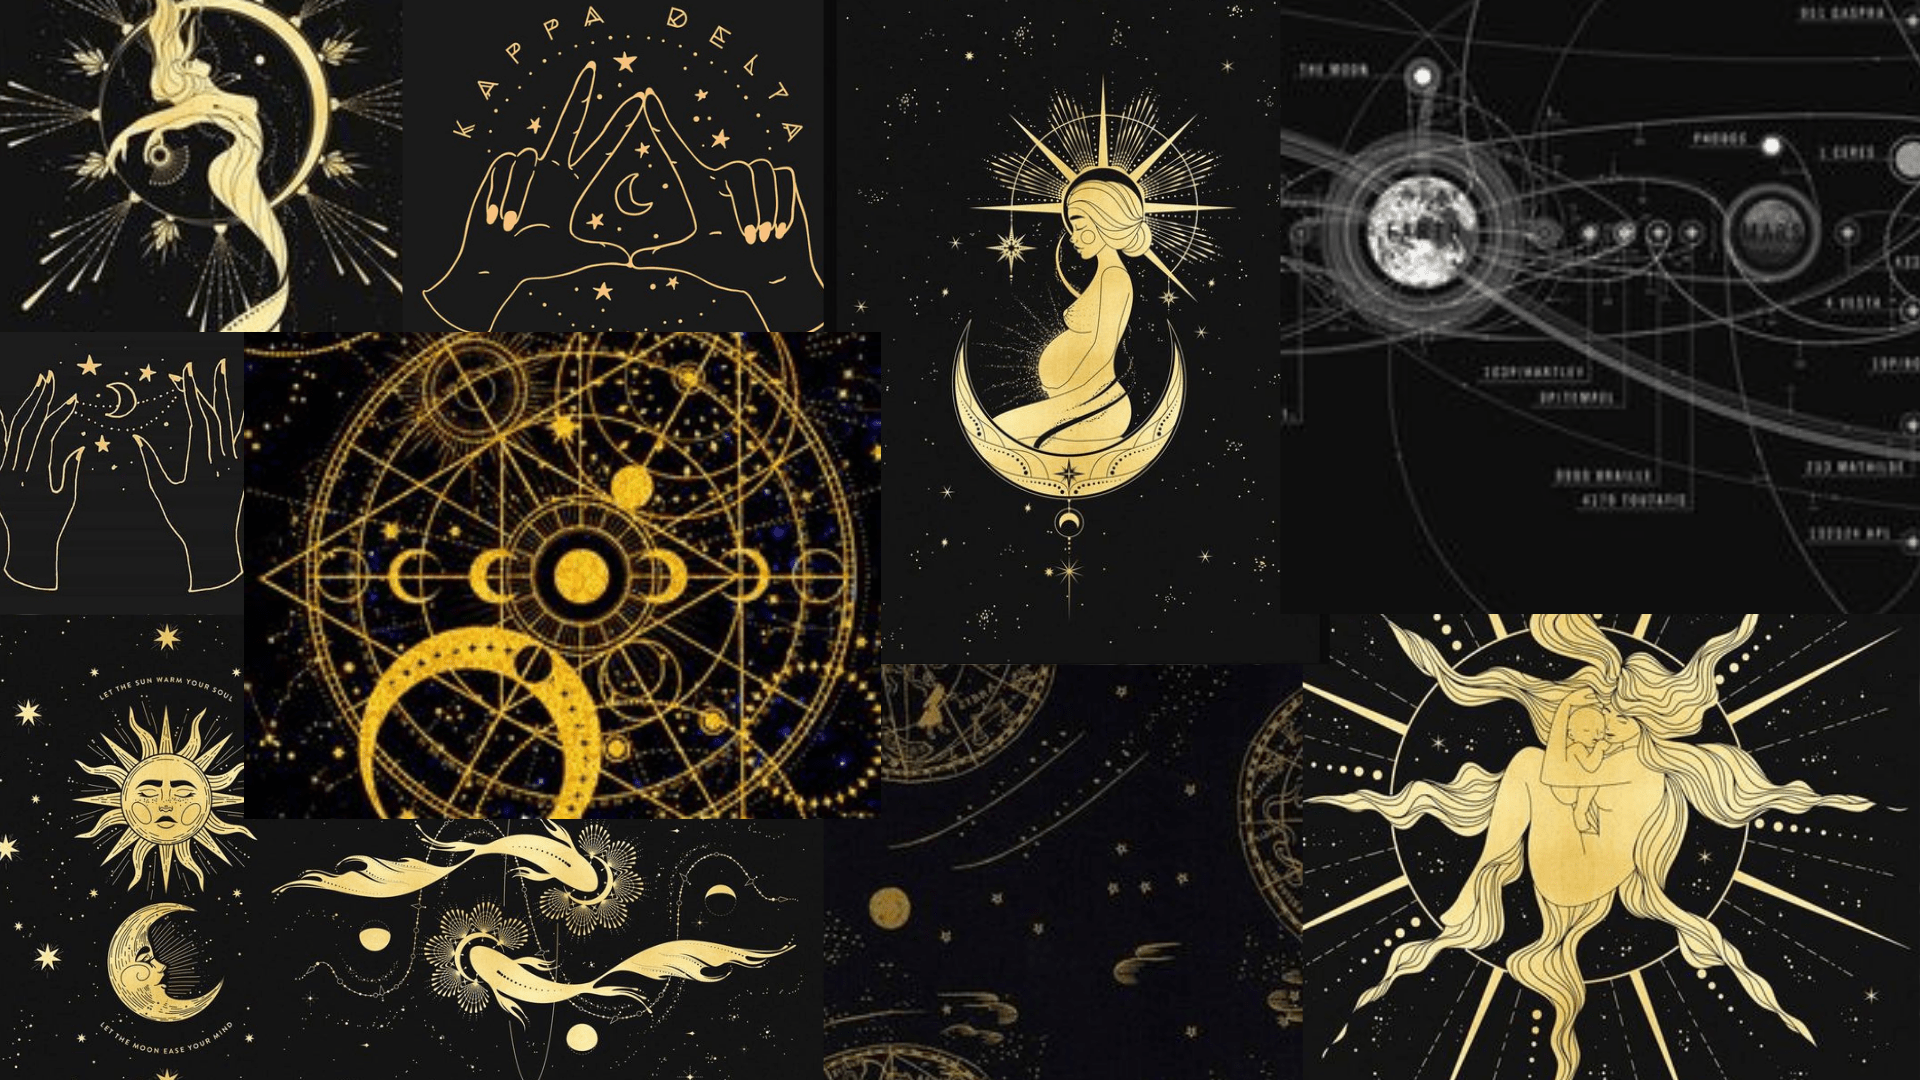 A collage of different images with gold and black - Witch